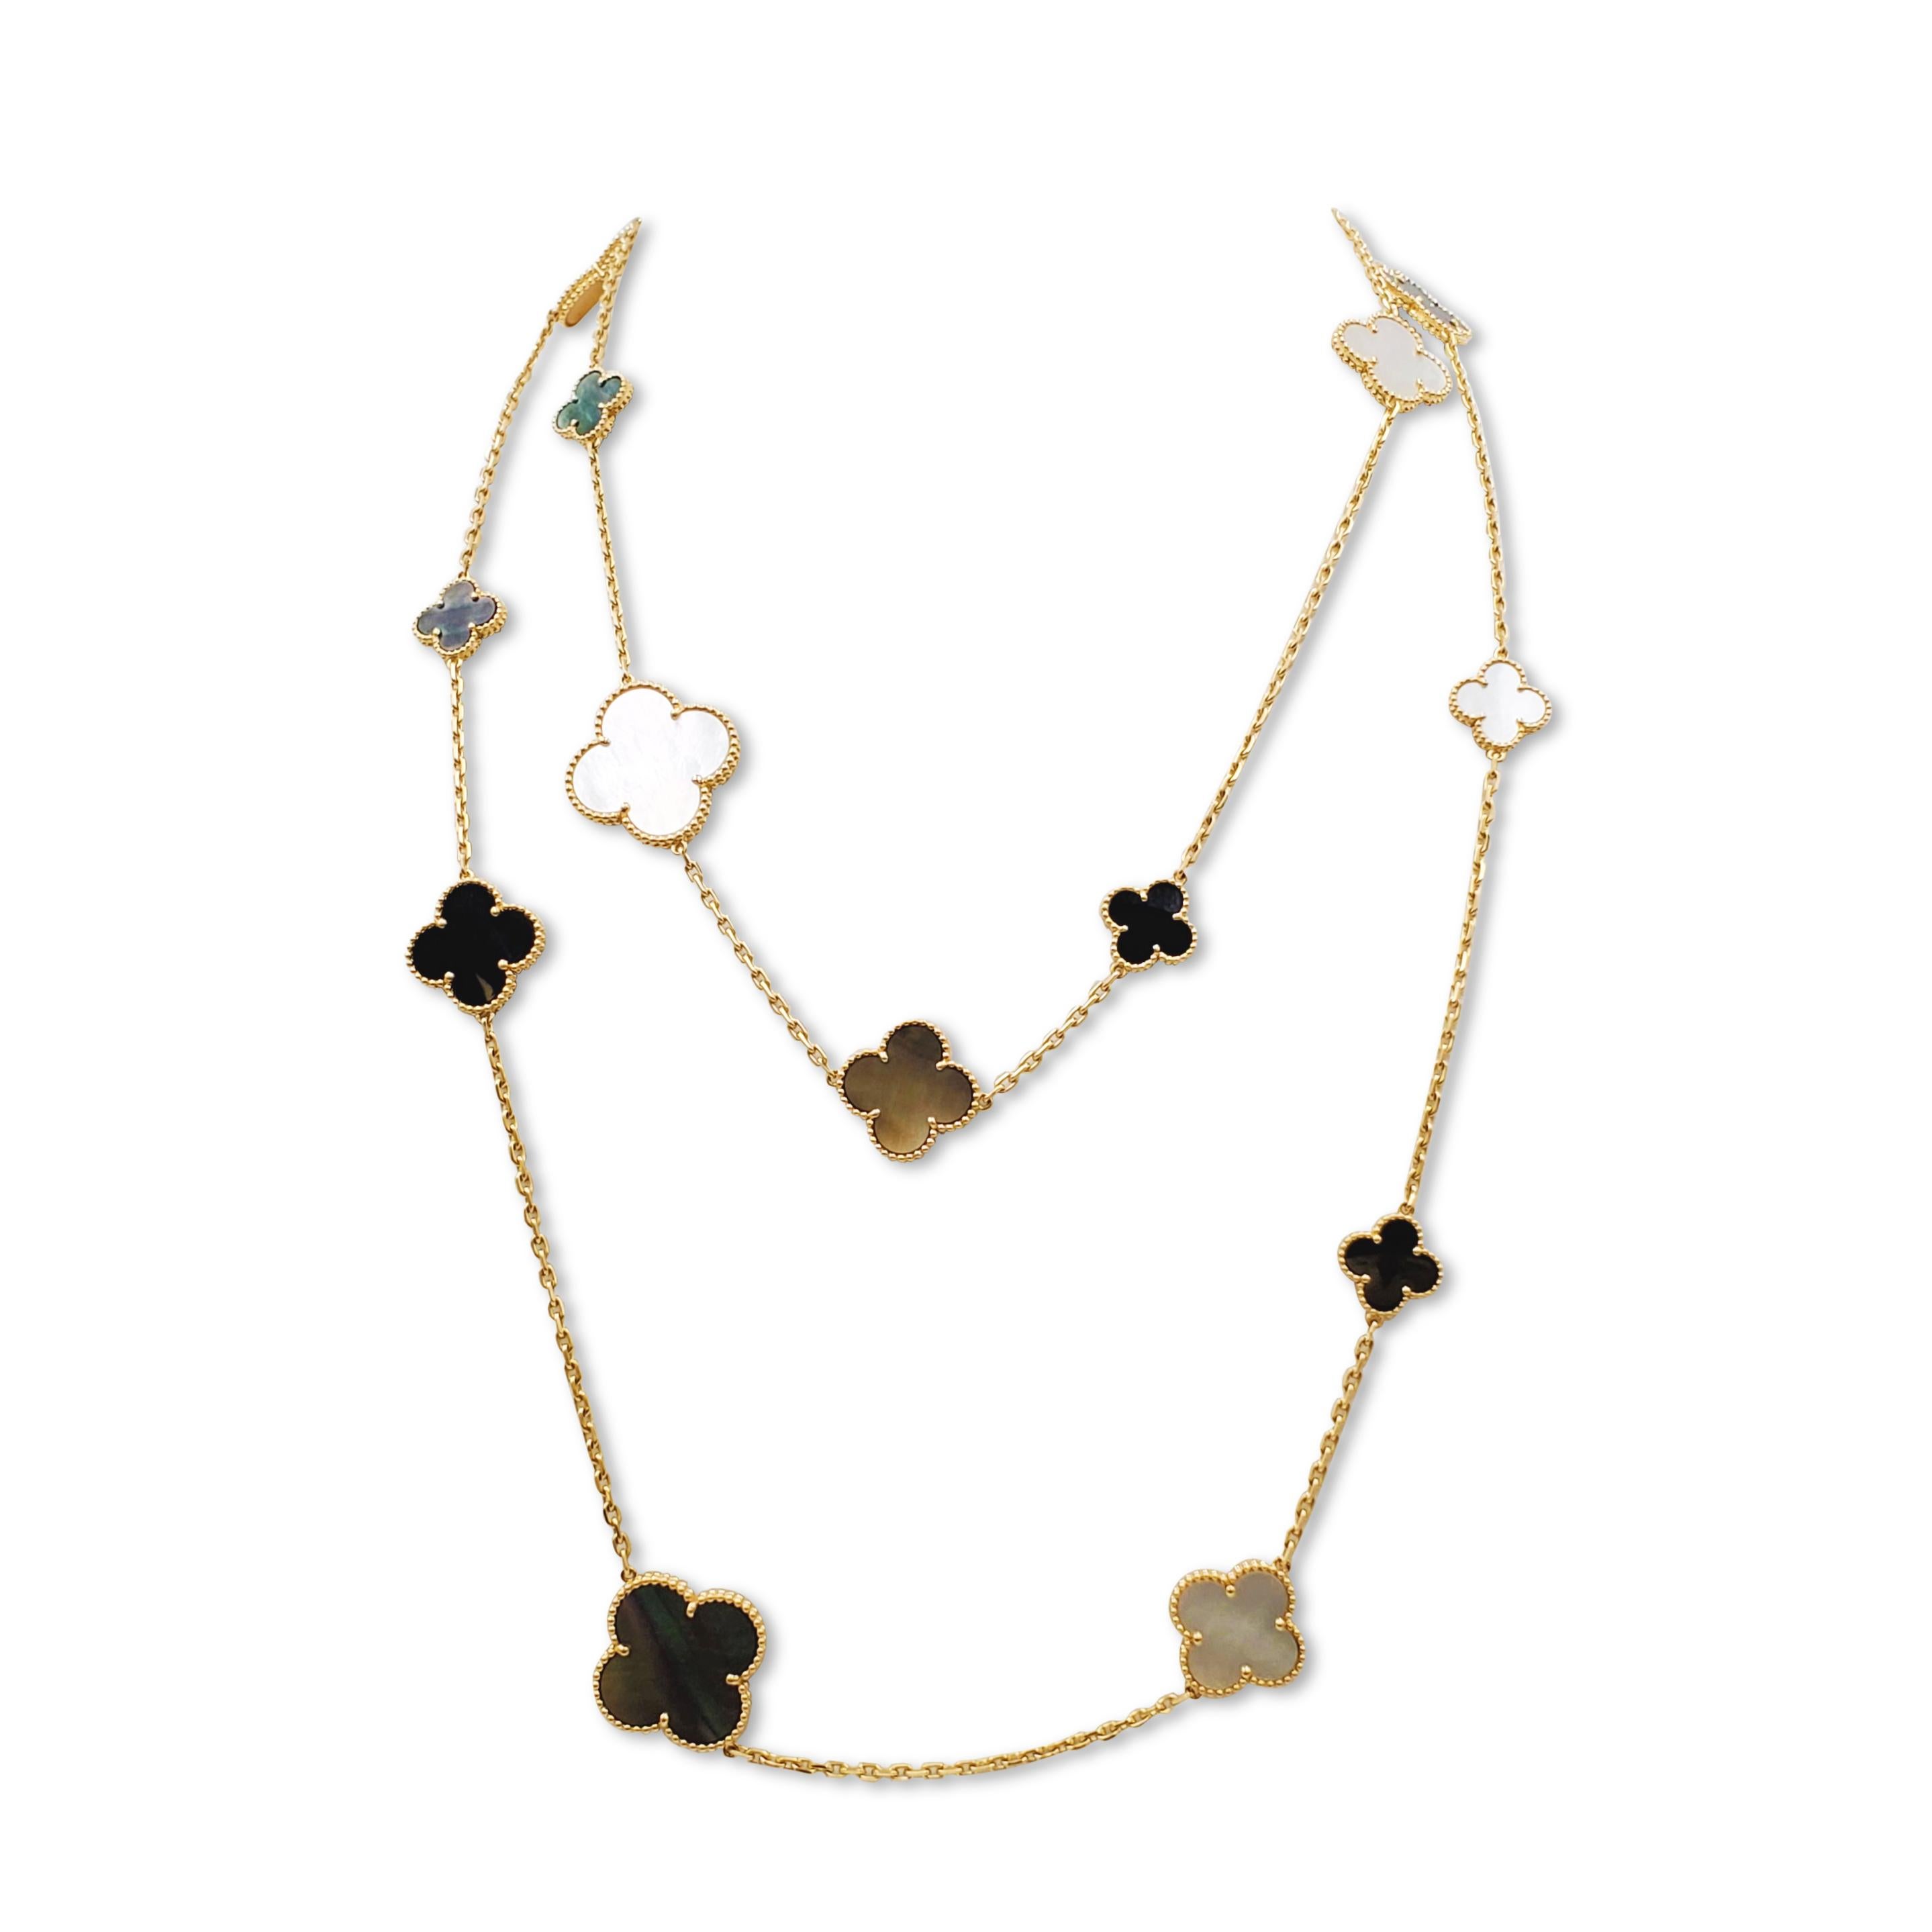 Authentic Van Cleef & Arpels 'Magic Alhambra' long necklace crafted in 18 karat yellow gold. Featuring a joyful mix of 16 clover-shaped onyx, white and gray mother-of-pearl motifs of varying sizes. The necklace measures 50.34 inches in length with